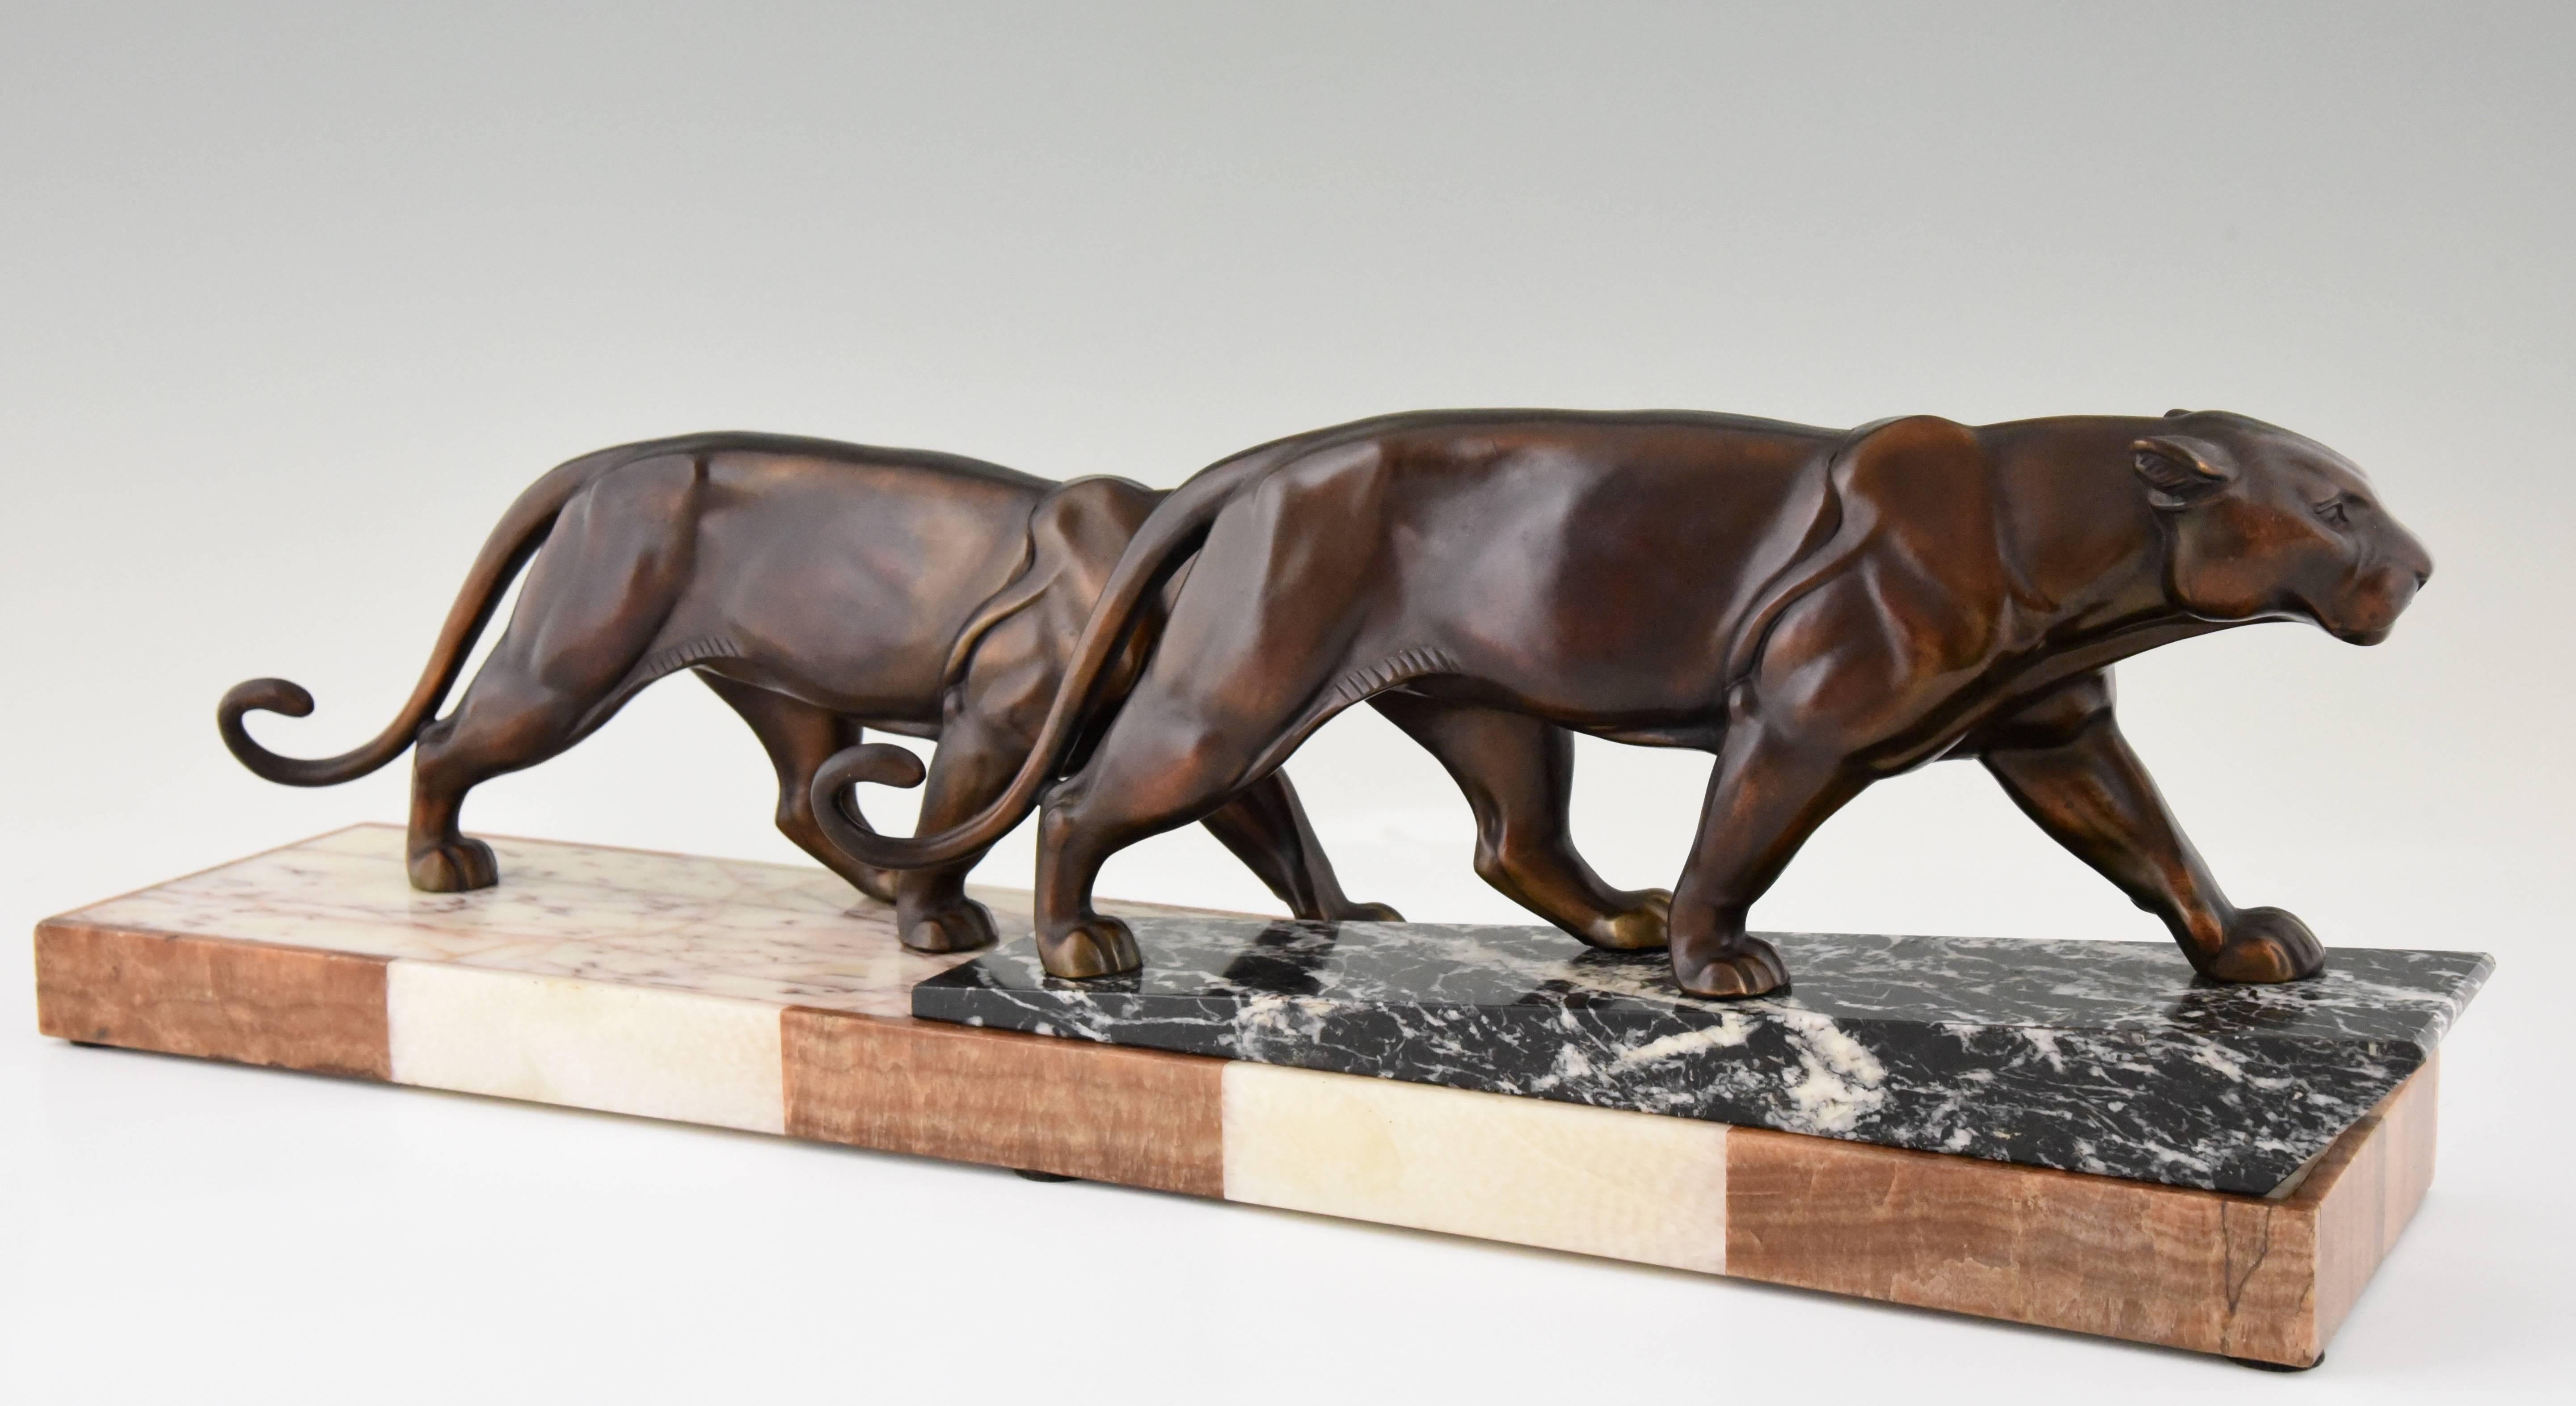 Patinated Art Deco Sculpture of Two Walking Panthers by Alexandre Ouline, 1930 France